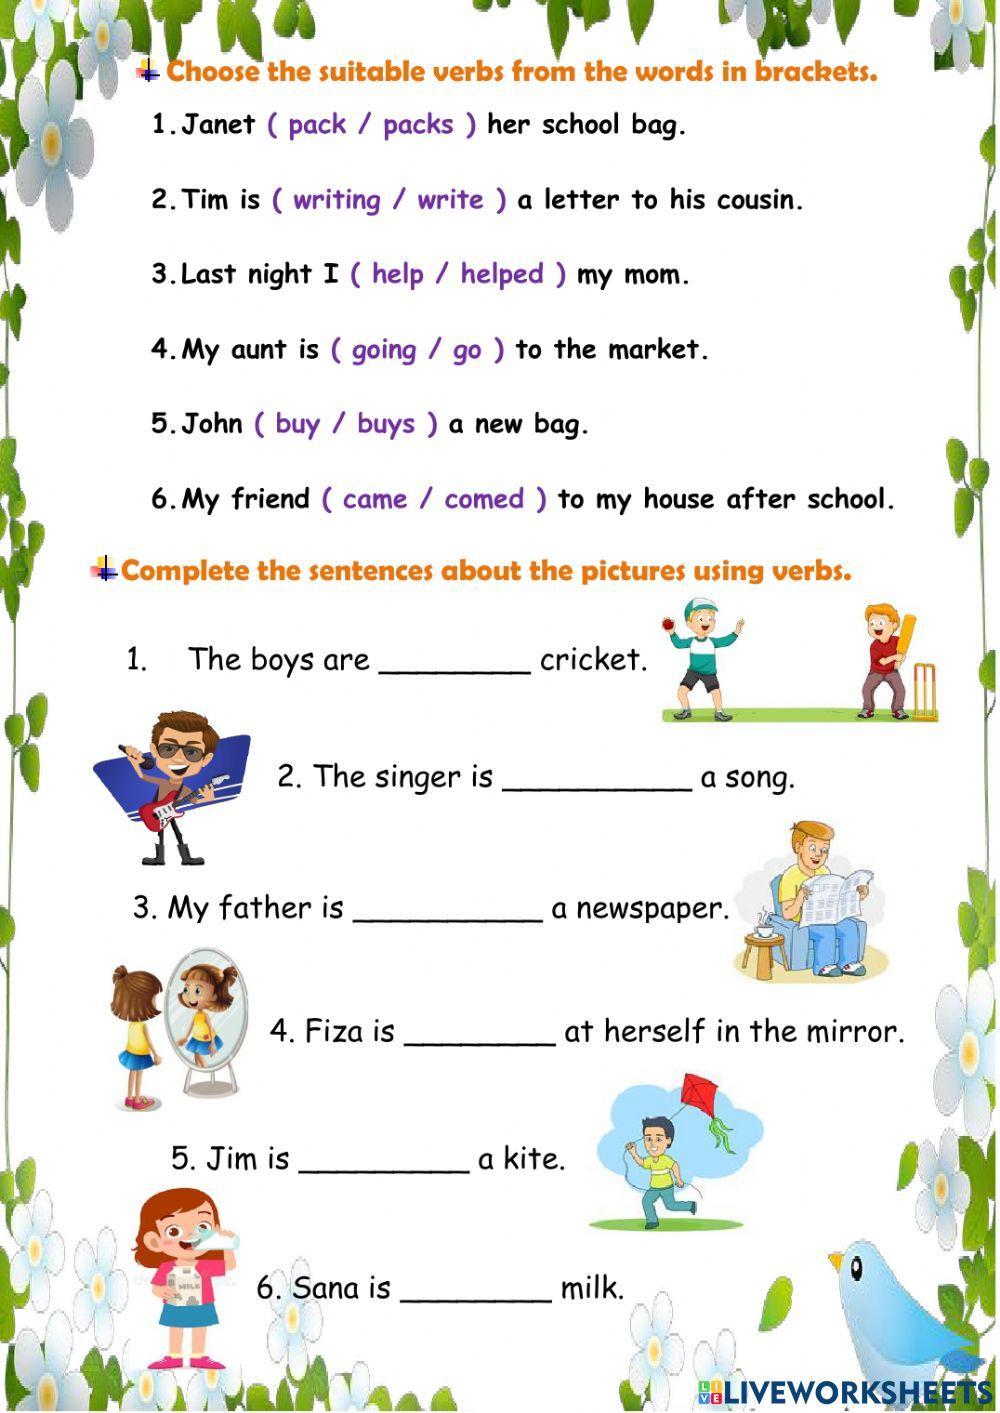 Nouns, Verbs and Adjectives